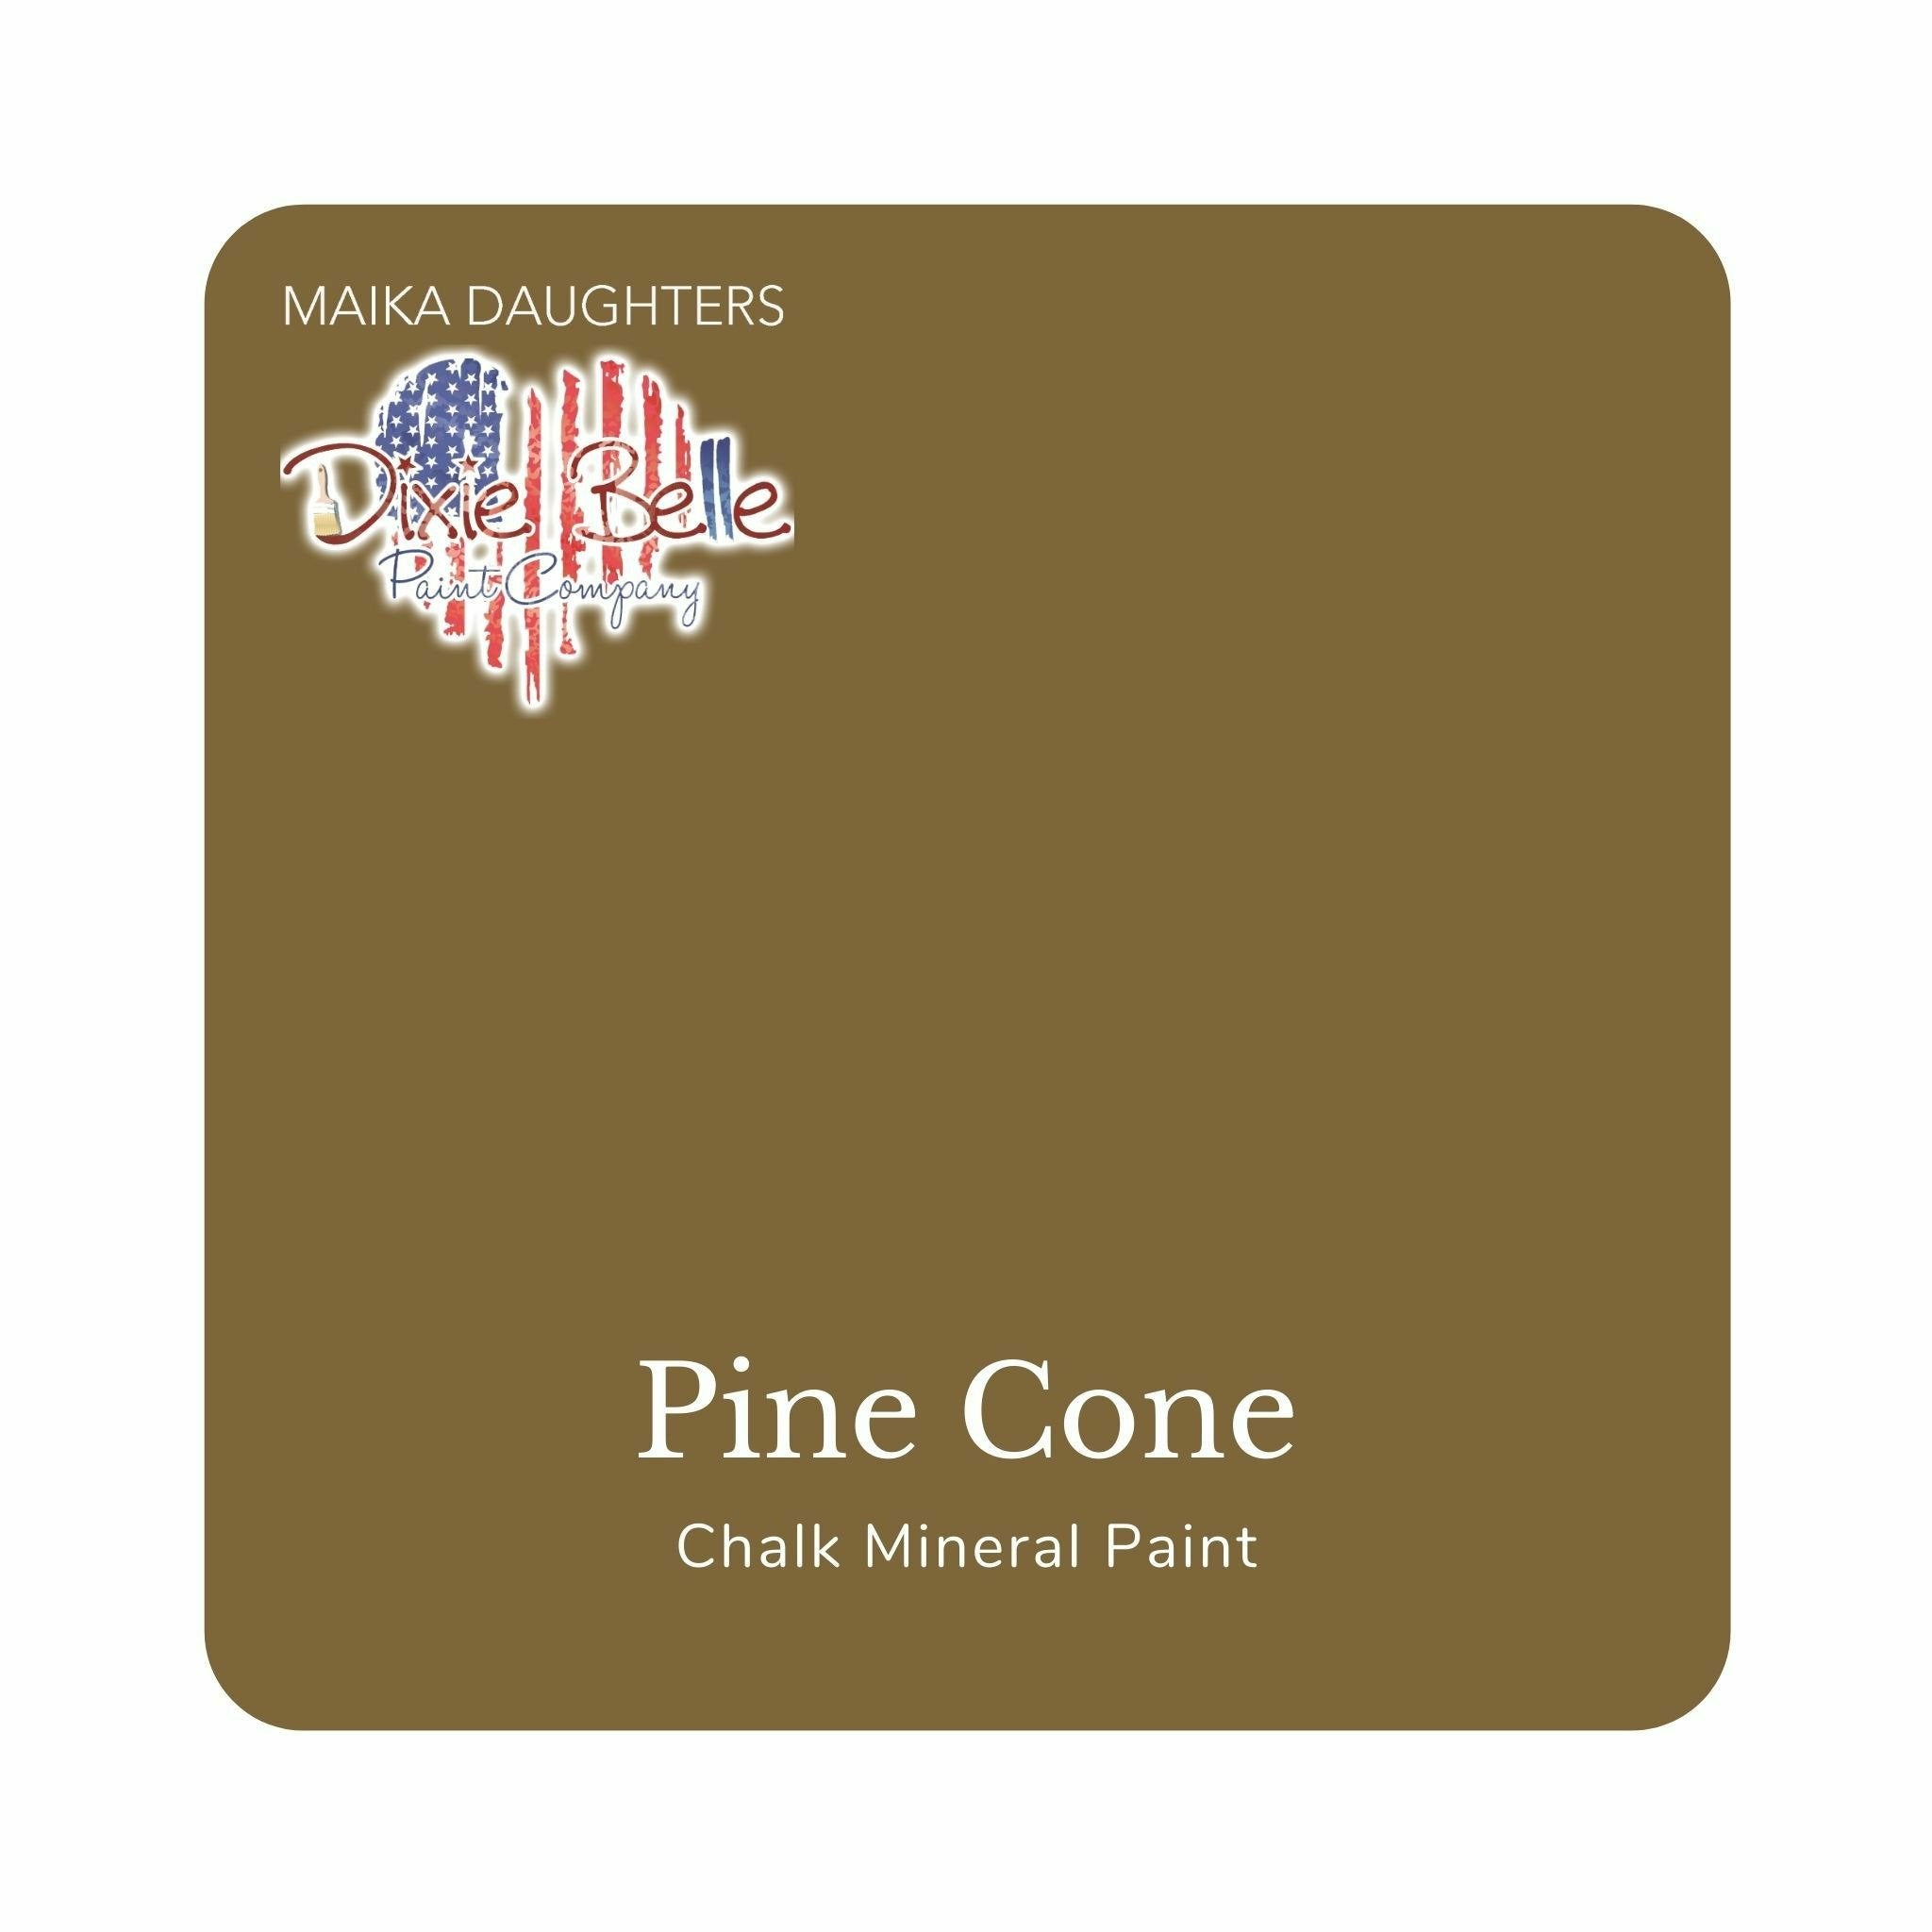 A square swatch card of Dixie Belle Paint Company’s Pine Cone Chalk Mineral Paint is against a white background. This color is a warm beige.